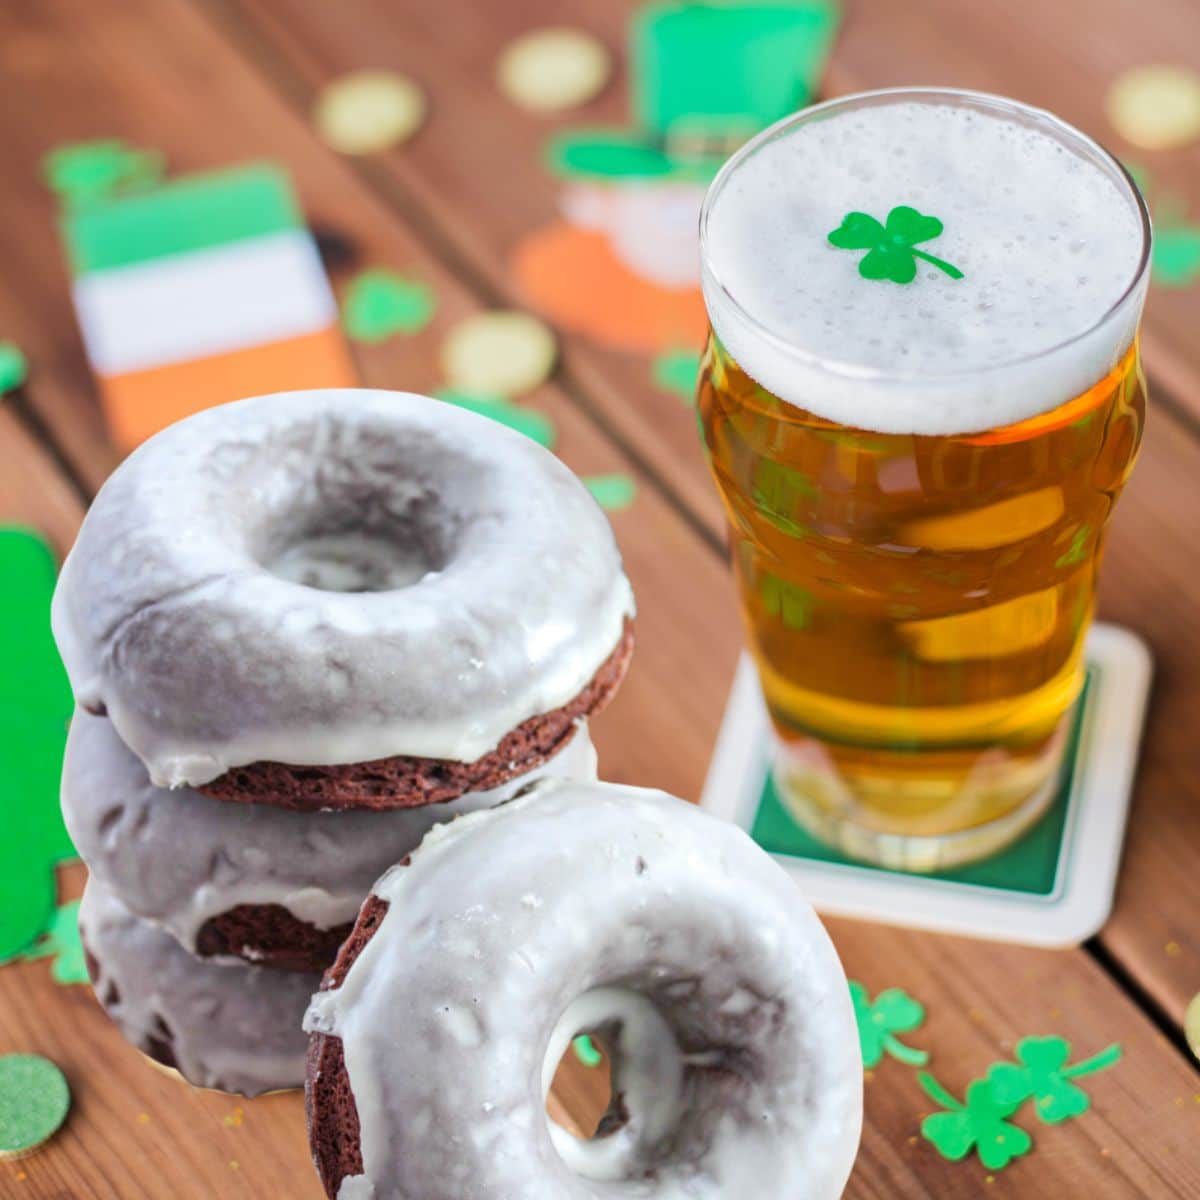 Chocolate Guinness Donuts with Irish Cream Glaze next to a glass of beer.